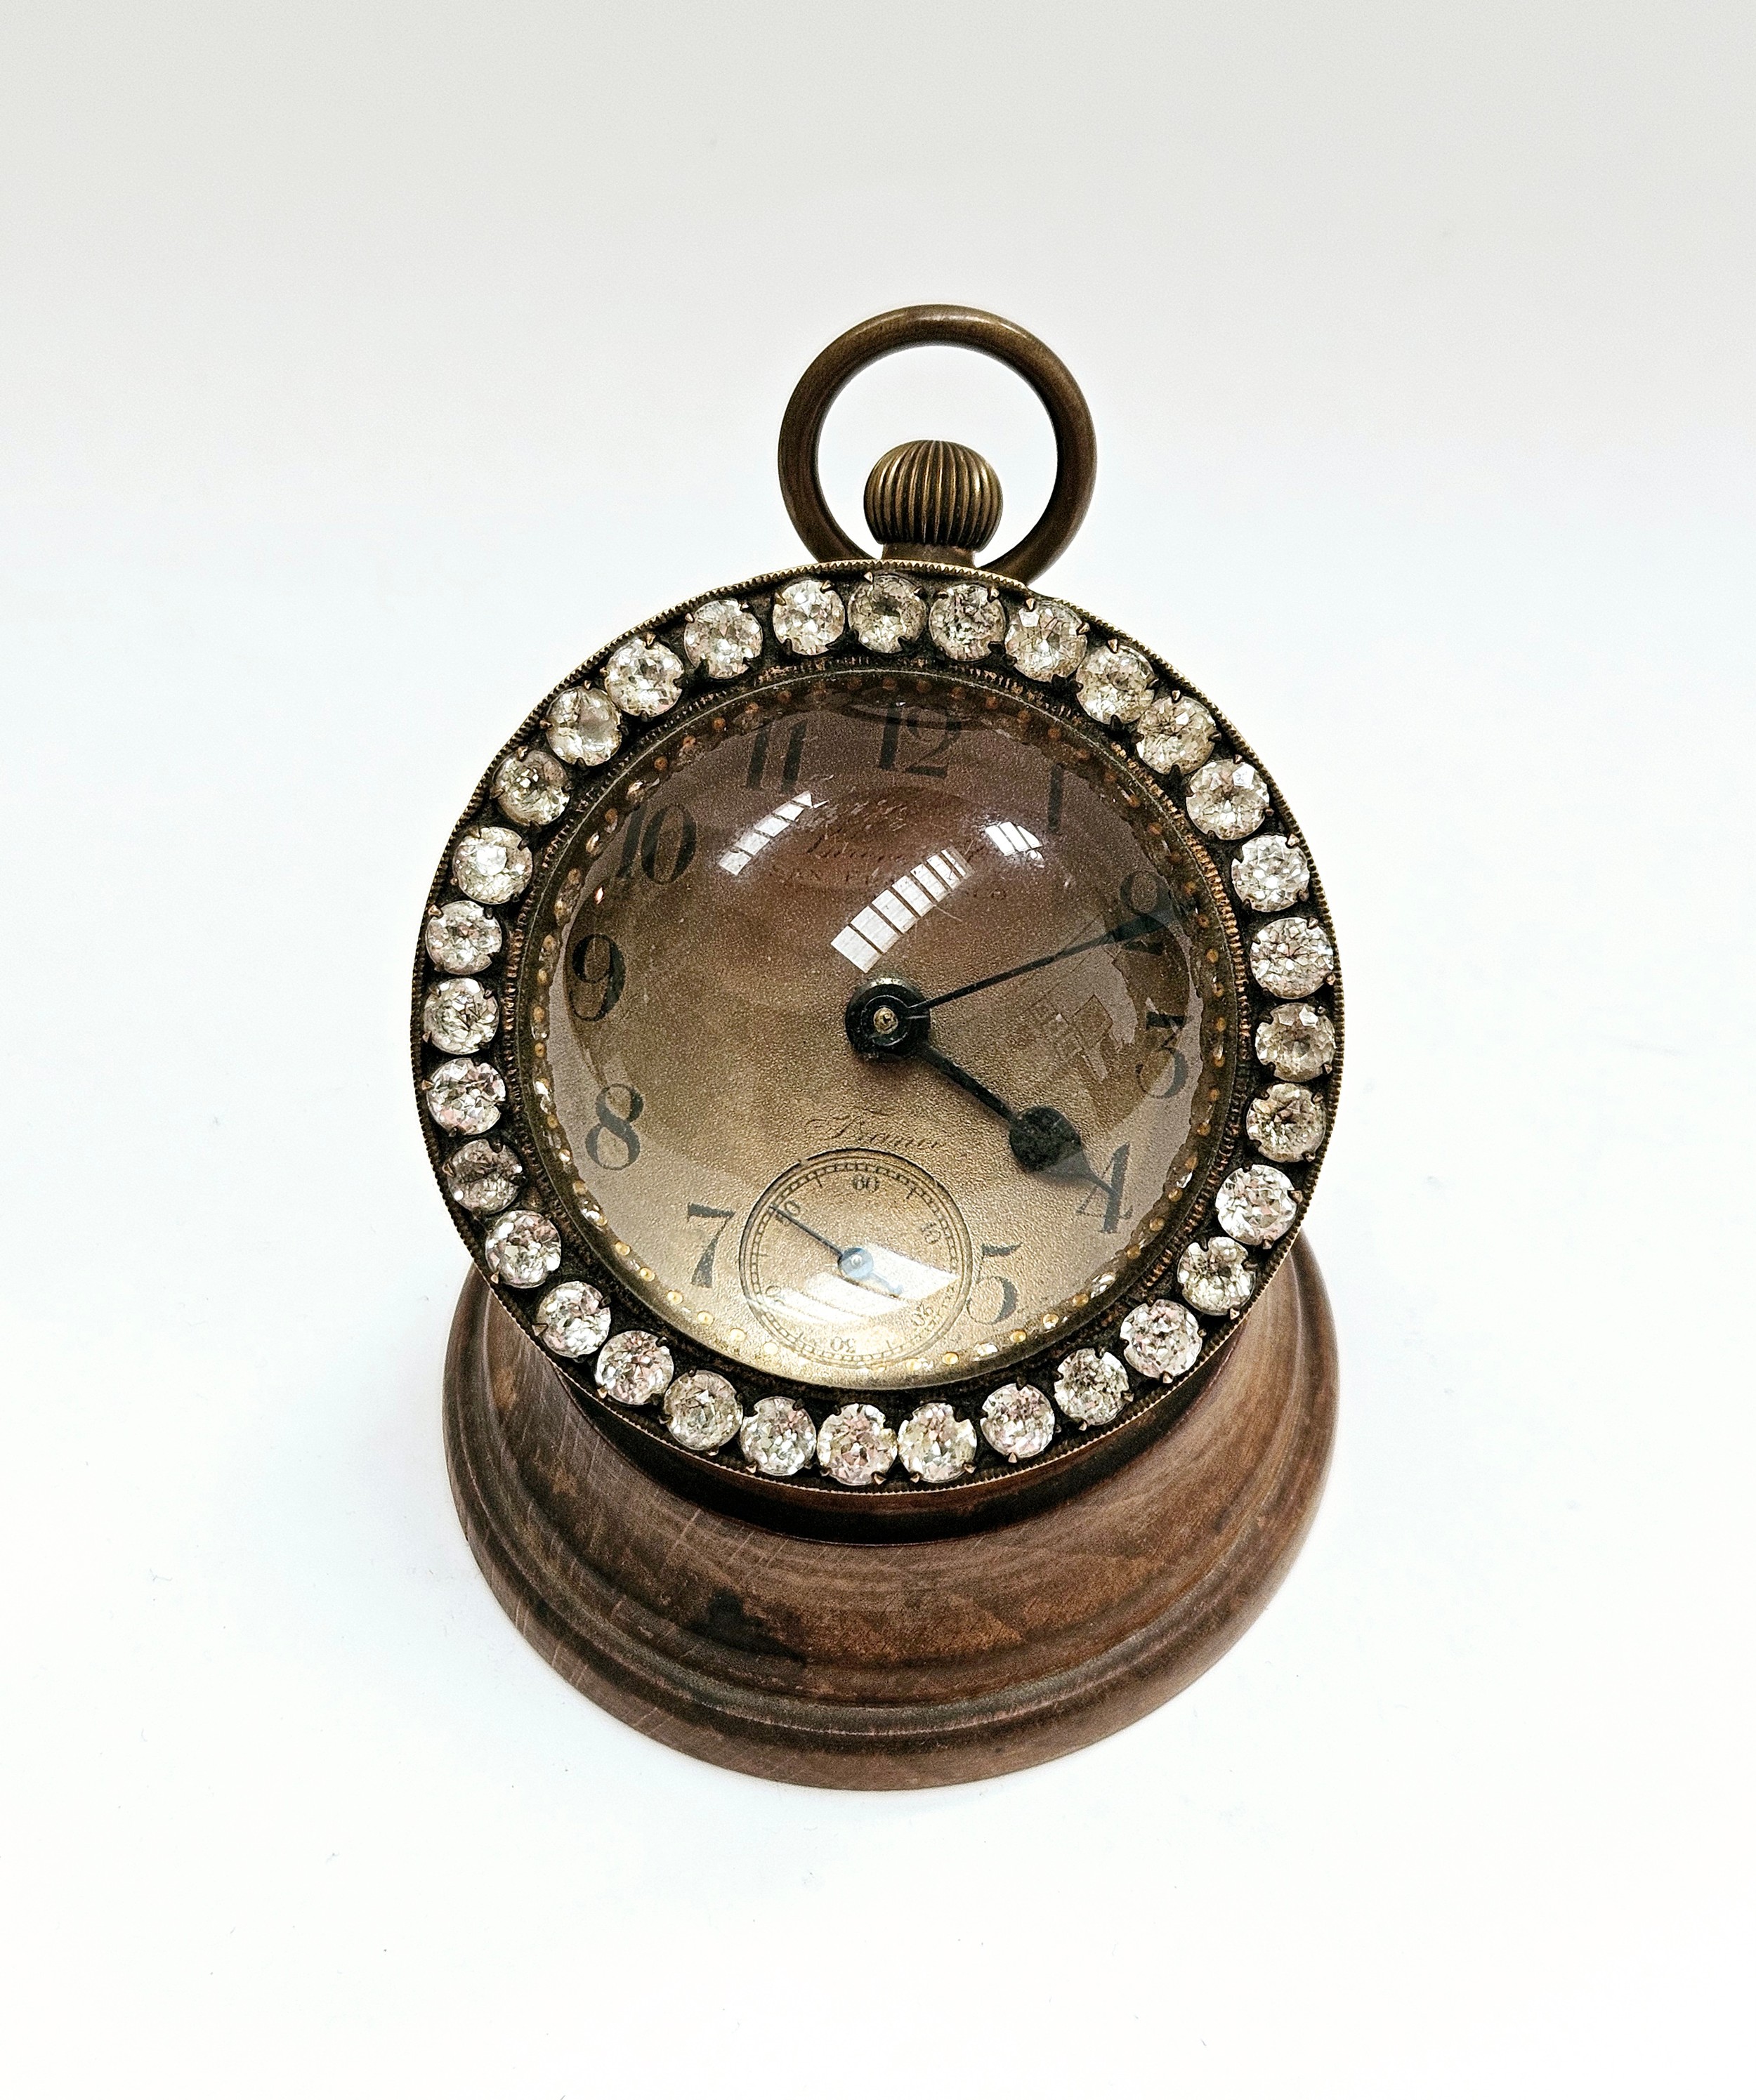 An American paperweight clock with French movement, Arabic numerals with subsidary seconds dial,